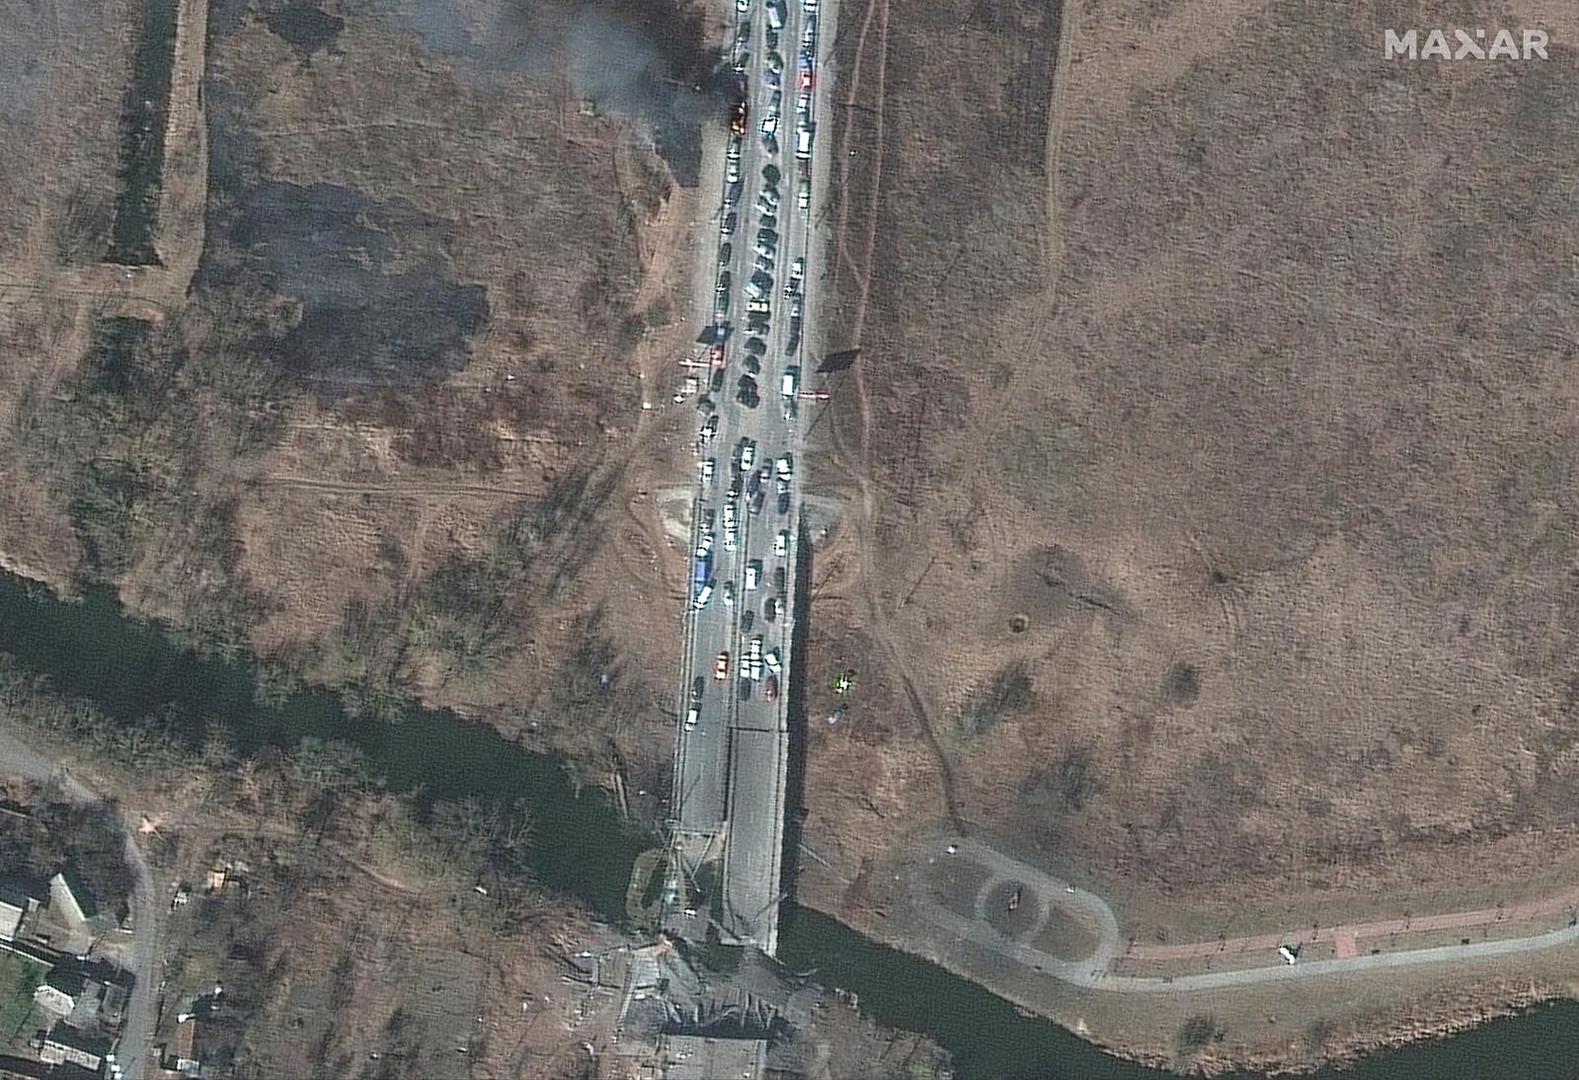 Satellite view of cars on fire near Irpin River bridge, Kyiv region, as Russia's invasion of Ukraine continues, in Irpin March 18, 2022 in this handout. Satellite image (C) 2022 Maxar Technologies/Handout via REUTERS ATTENTION EDITORS - THIS IMAGE HAS BEEN SUPPLIED BY A THIRD PARTY. MANDATORY CREDIT. WATERMARK MAY NOT BE REMOVED/CROPPED. NO RESALES. NO ARCHIVES Photo: MAXAR TECHNOLOGIES/REUTERS